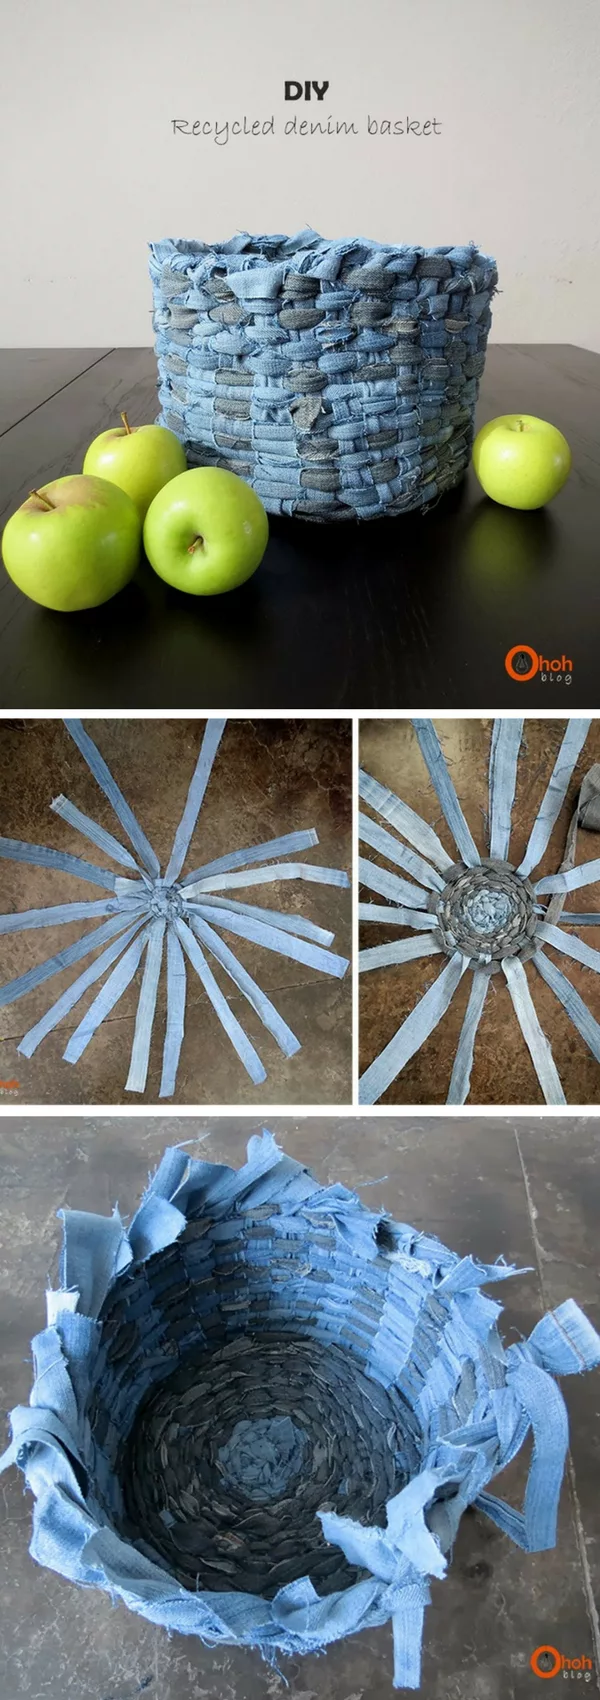 Check out how to make a DIY decorative basket from old jeans 